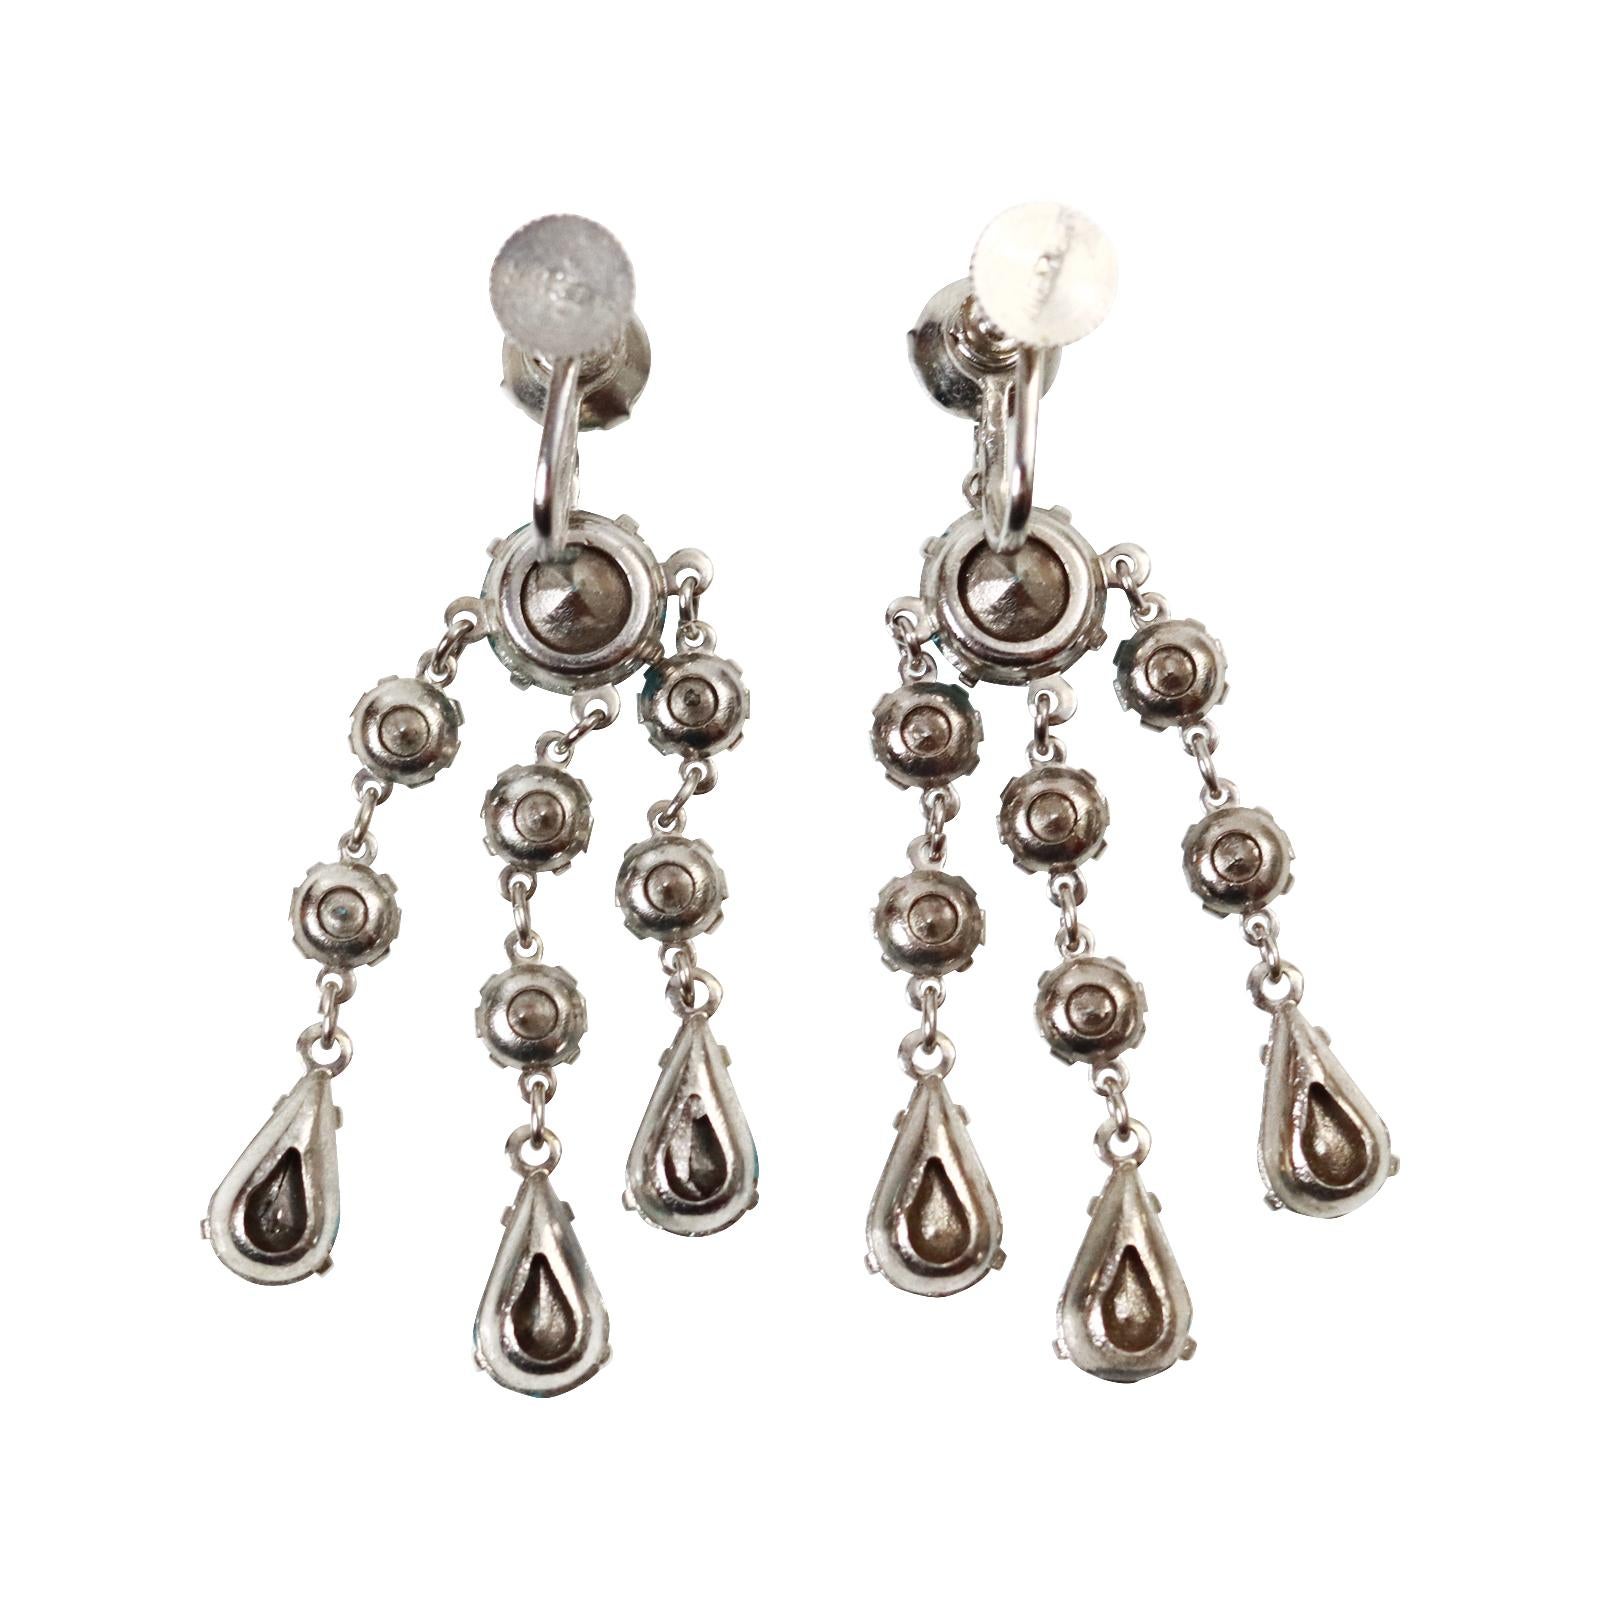 Artist Vintage Wiesner Round and Pear Dangling Earrings circa 1960s For Sale